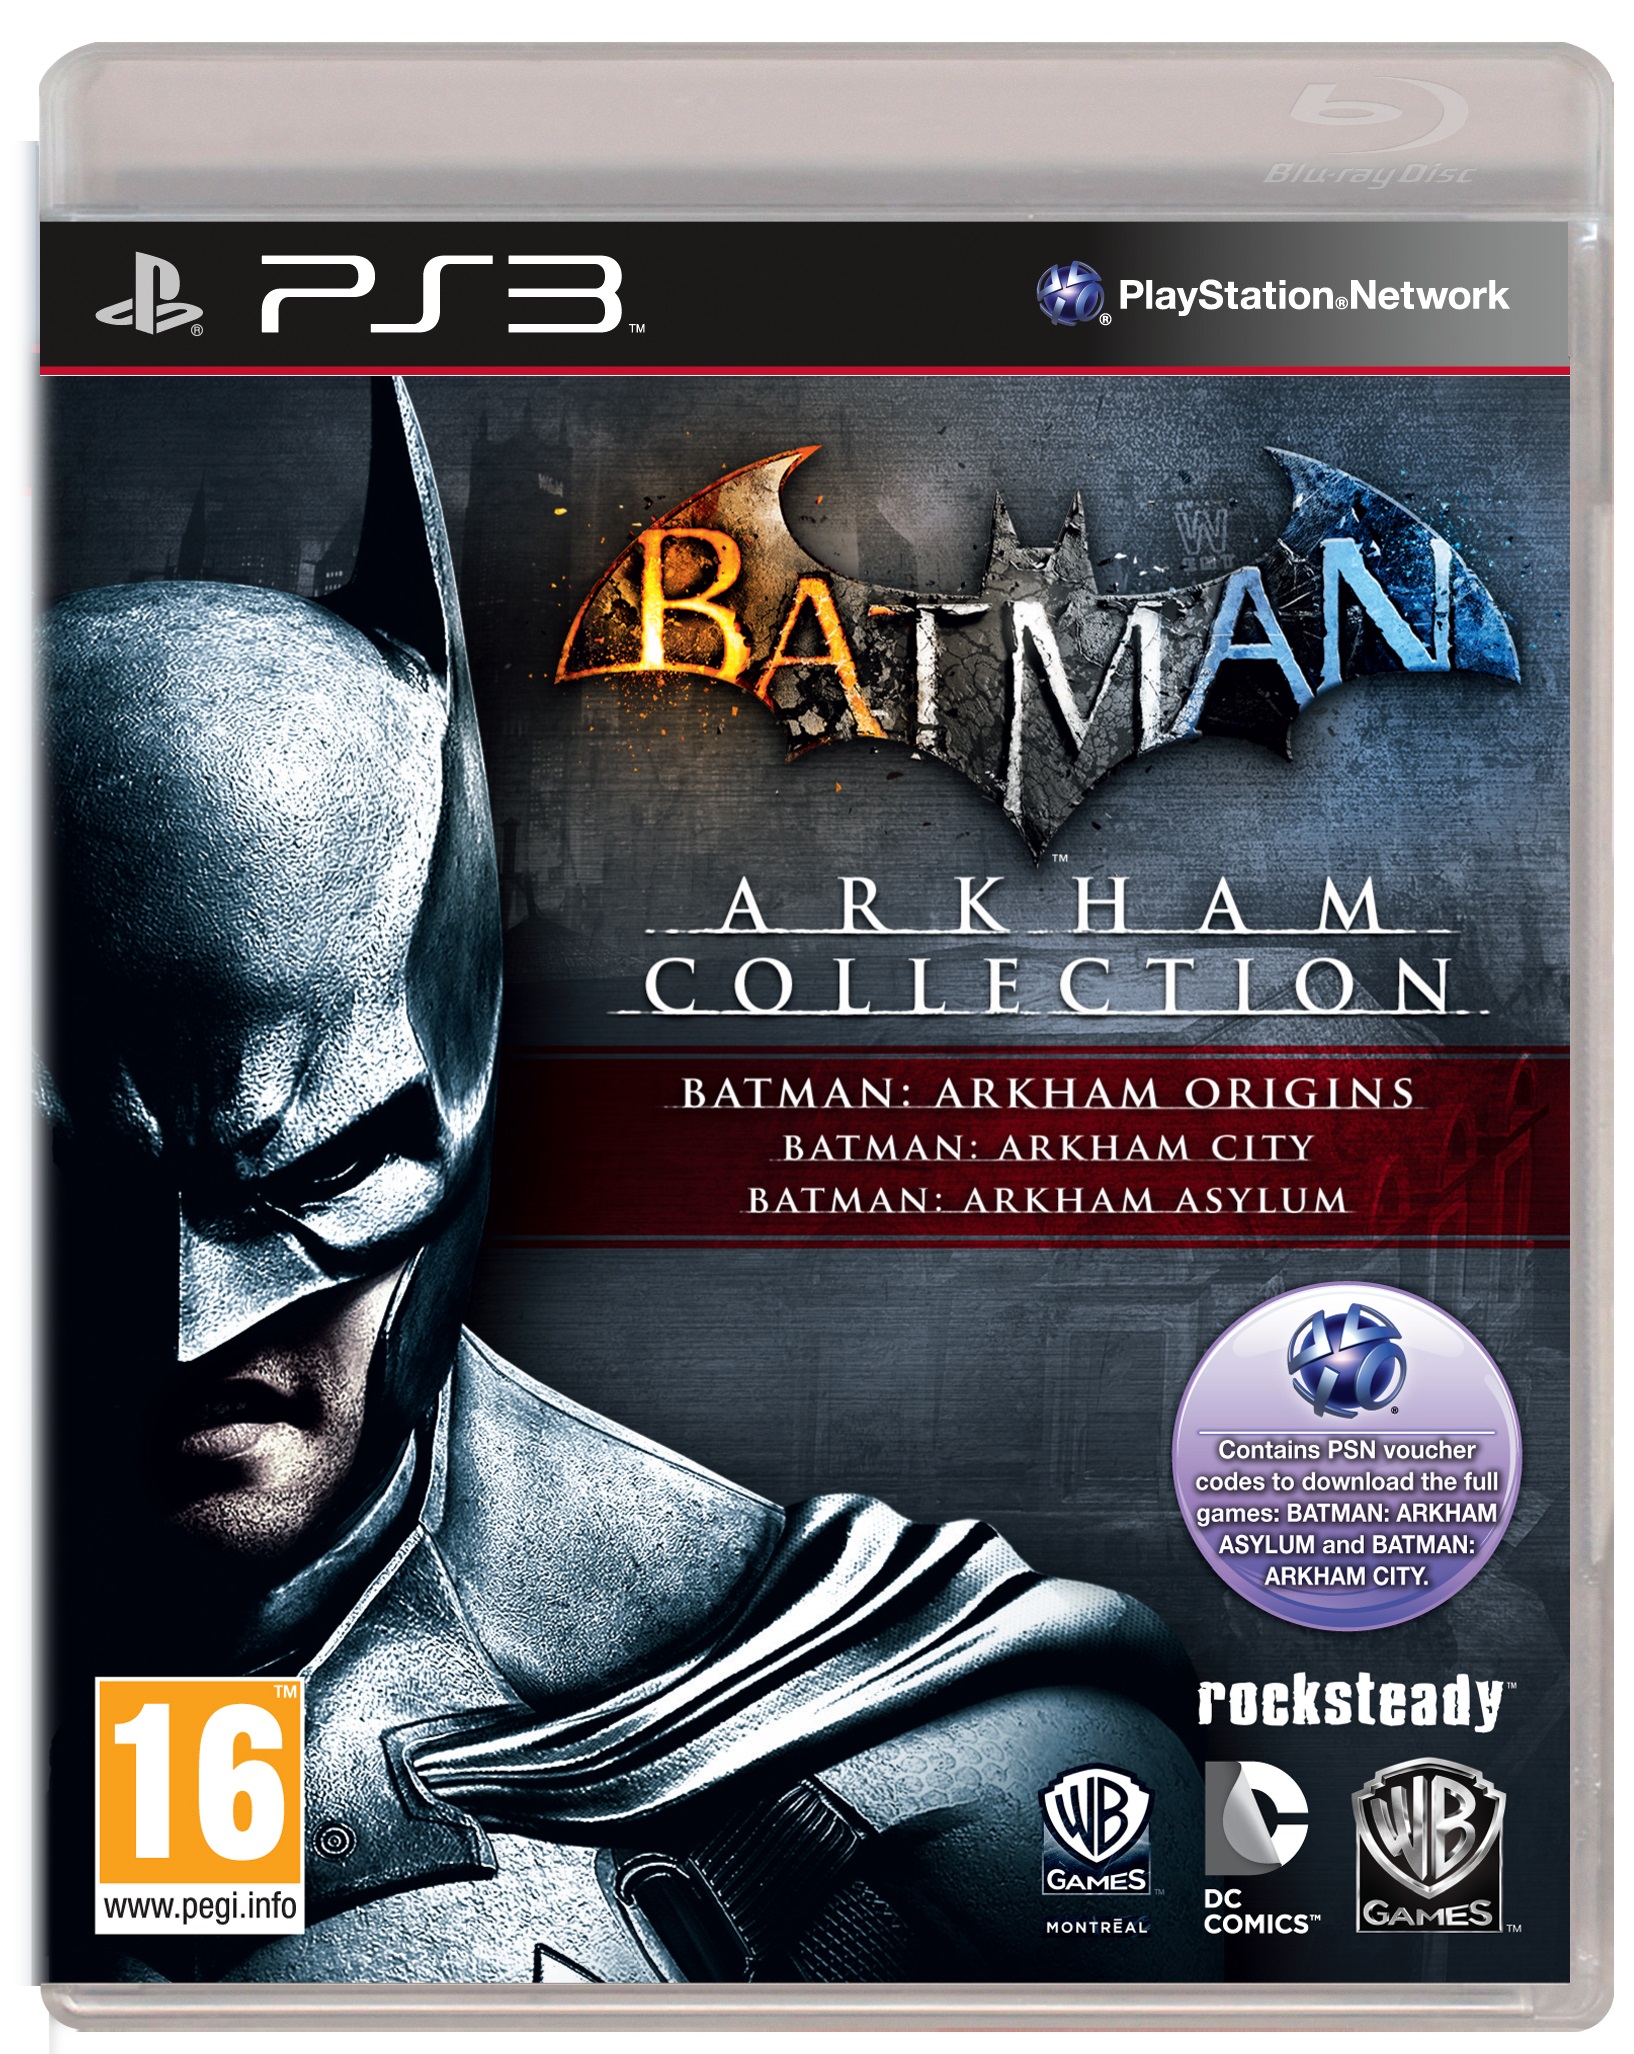 Beliggenhed kan ikke se hjerne Batman Arkham Collection Announced, Out Next Week | TheSixthAxis